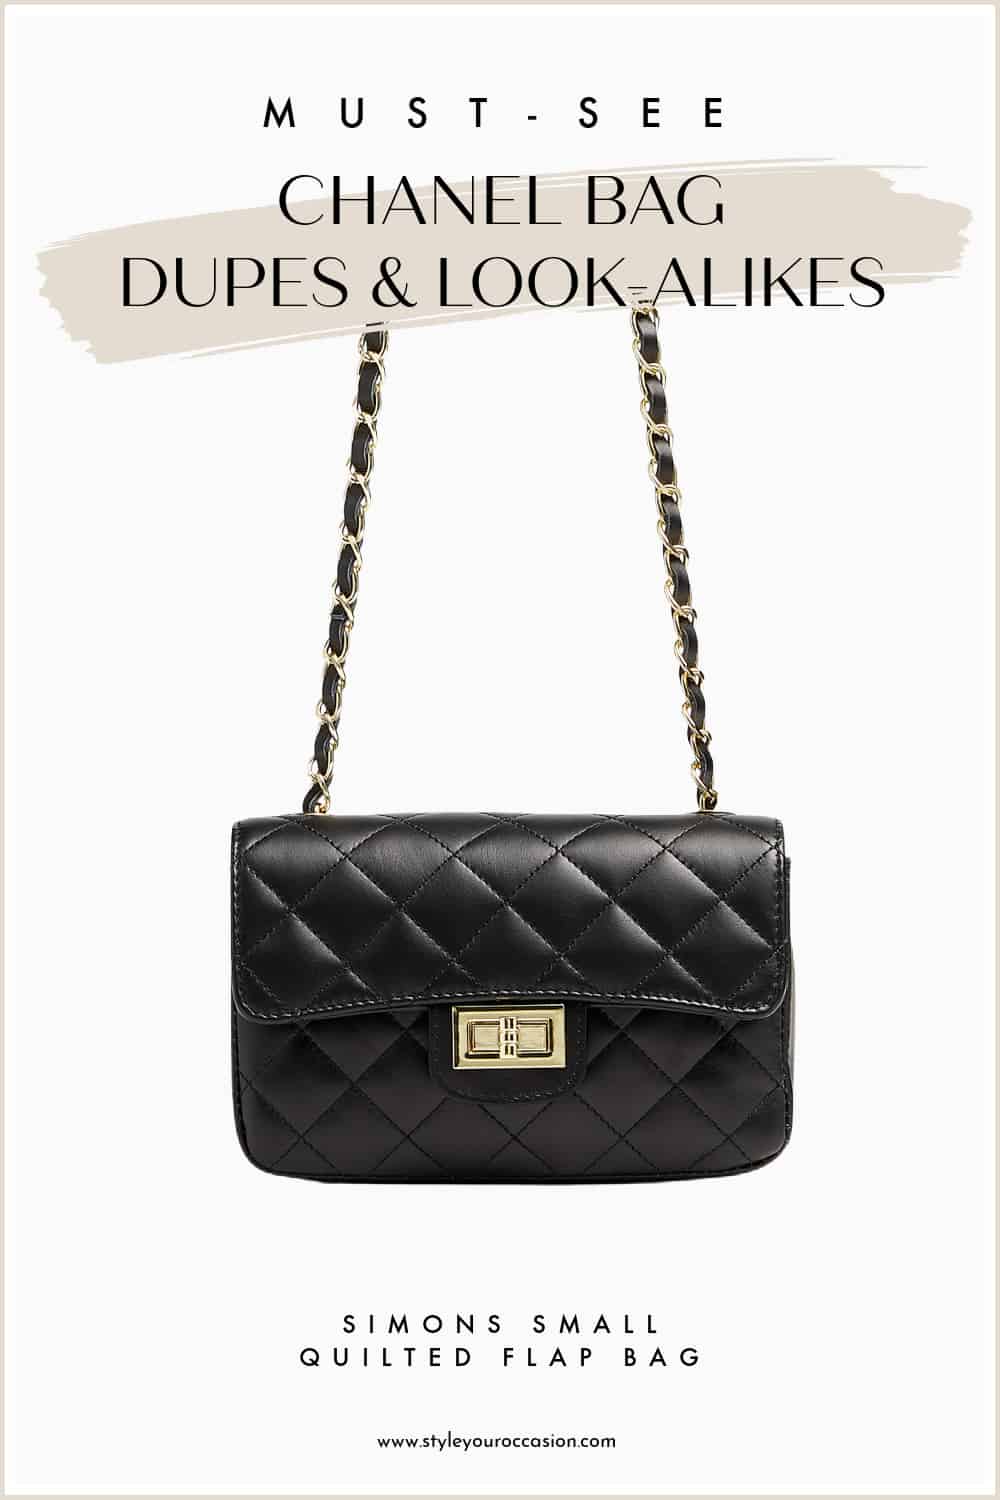 An image of a black quilted Chanel bag dupe from Simons